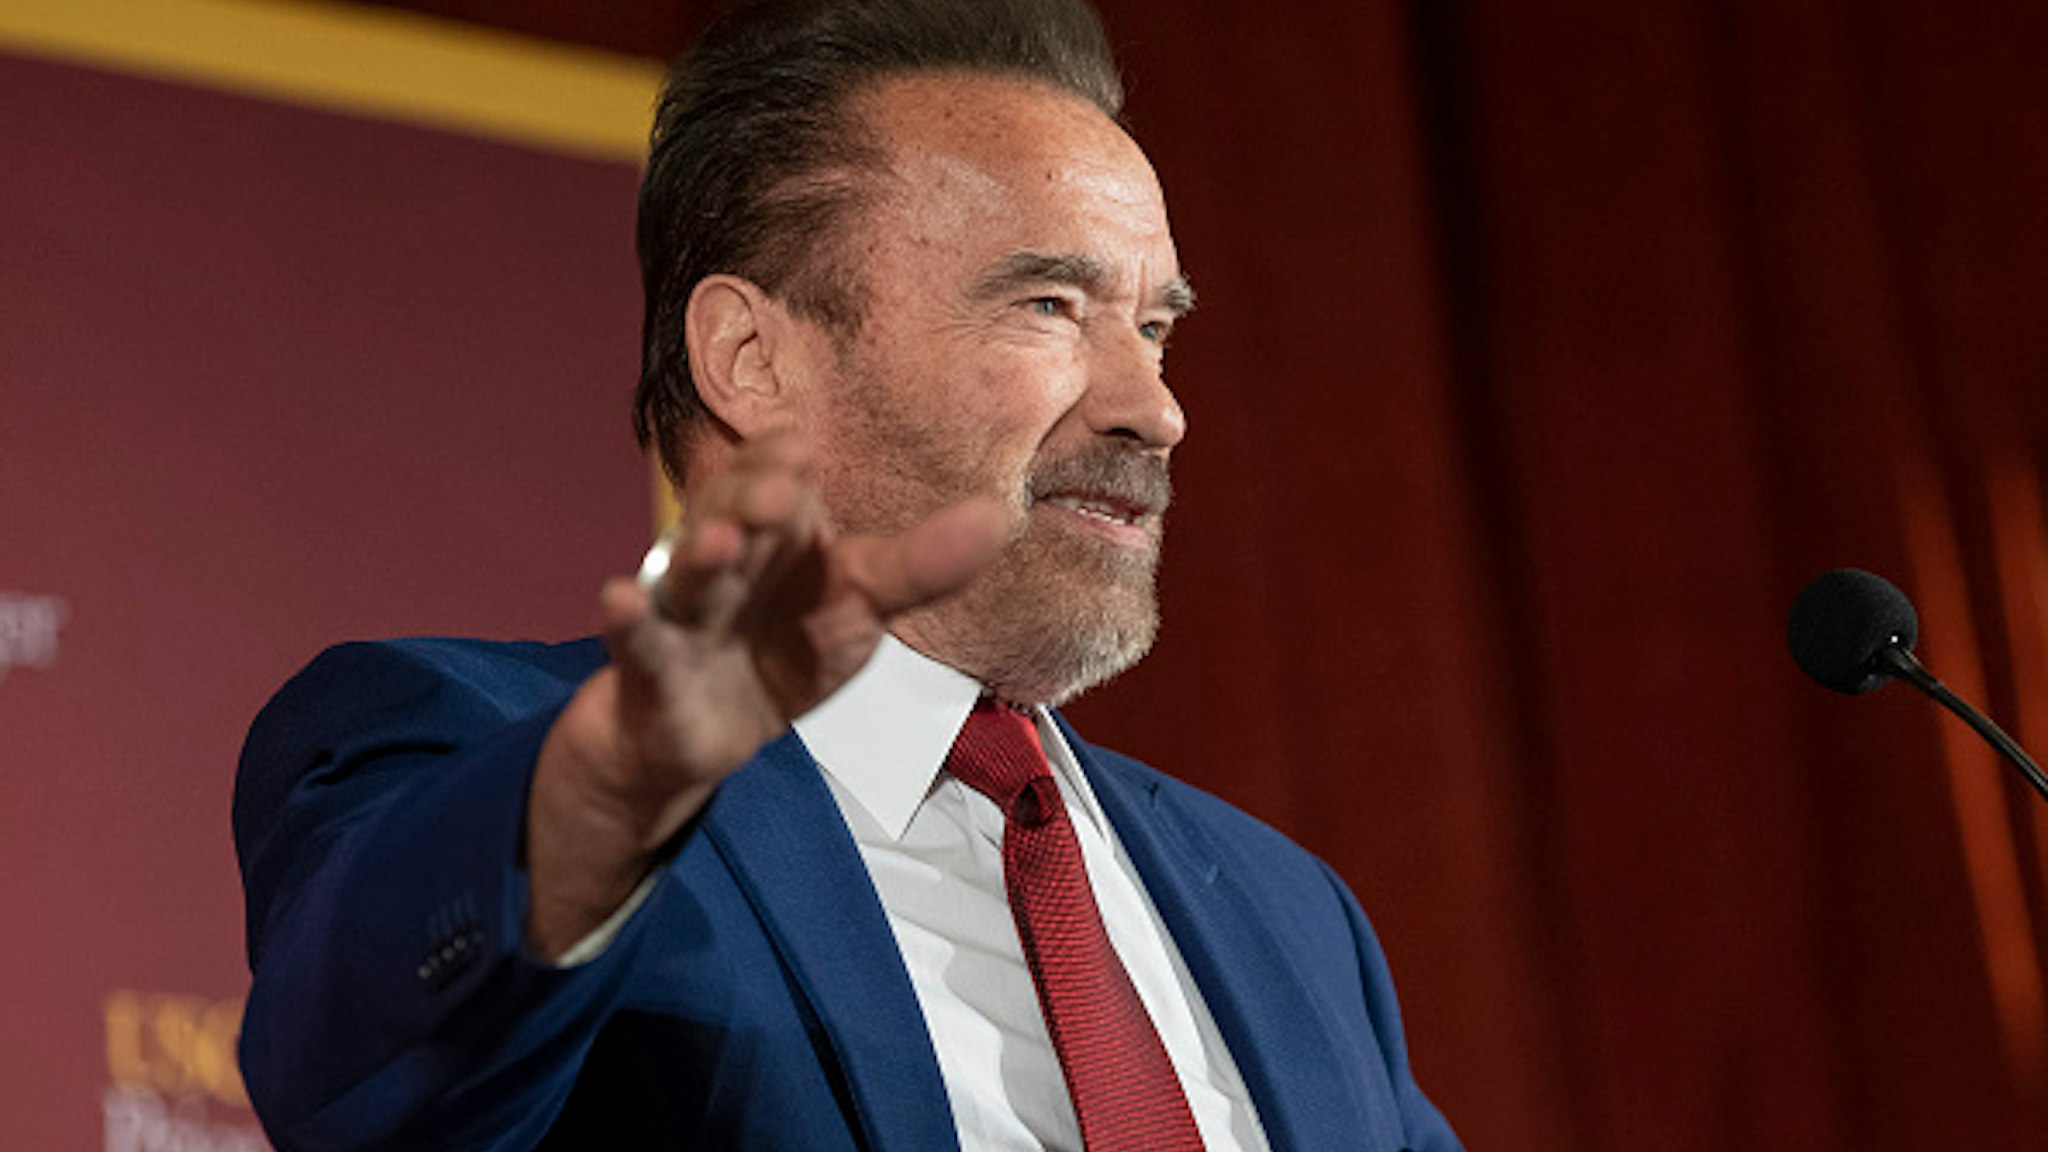 LOS ANGELES, CA - FEBRUARY 13: Former Gov. Arnold Schwarzenegger speaks during Unhoused: Addressing Homelessness in California at the University of Southern California in Los Angeles, CA on Thursday, February 13, 2020. The program was presented by the USC Schwarzenegger Institute for State and Global Policy and USC Price Center for Social Innovation